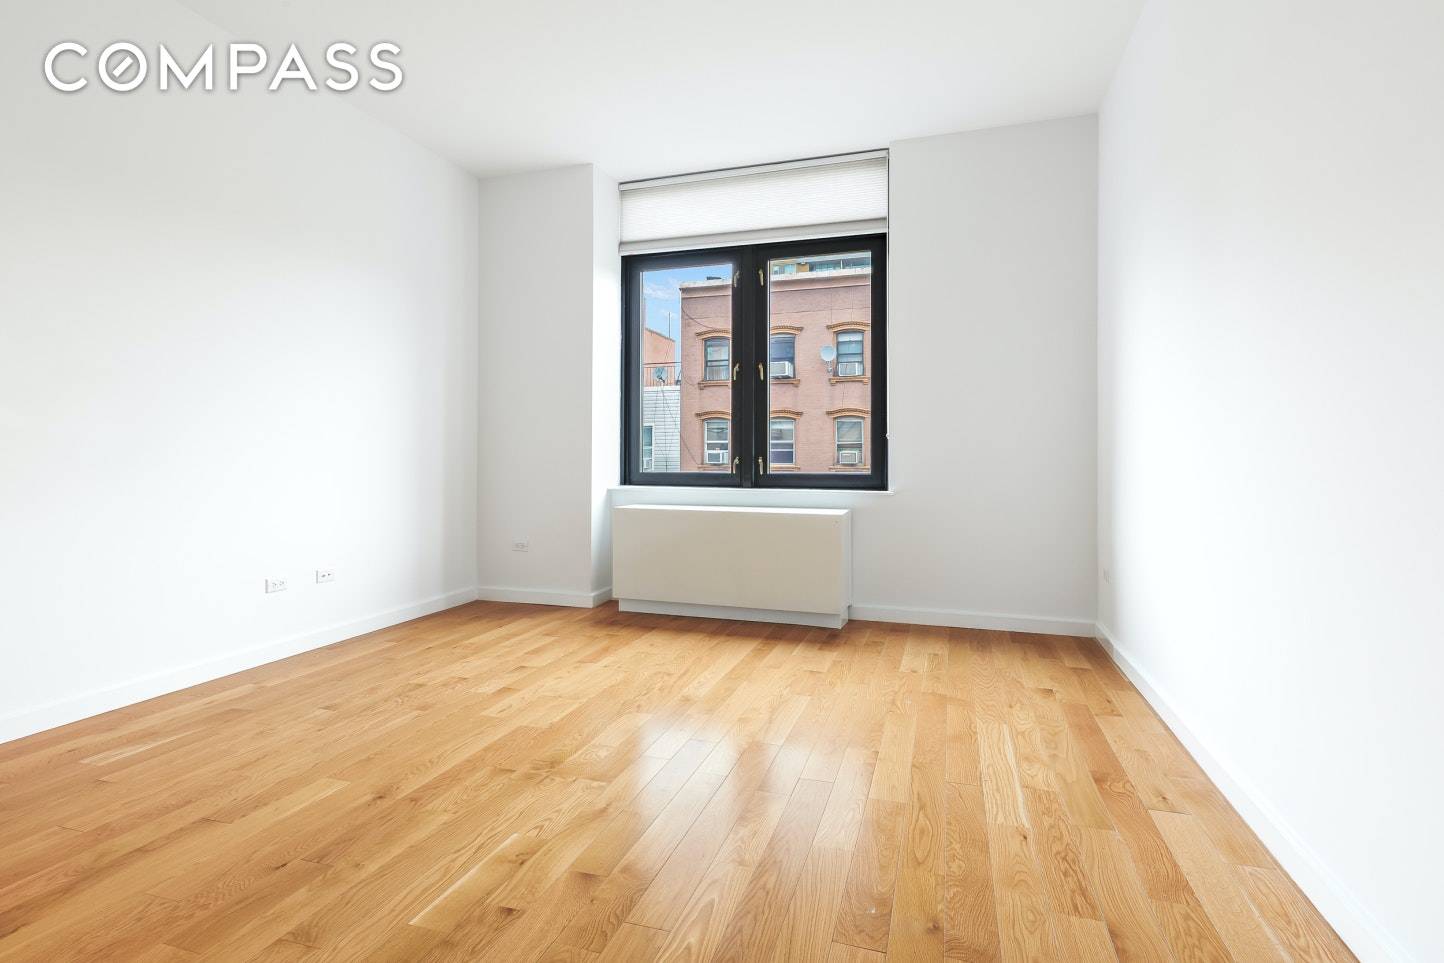 Williamsburg's most sought after boutique rental residences Beautiful unit in the heart of Williamsburg High ceilings Hardwood floors Tons of closet space Washer Dryer in Unit High end appliances and ...